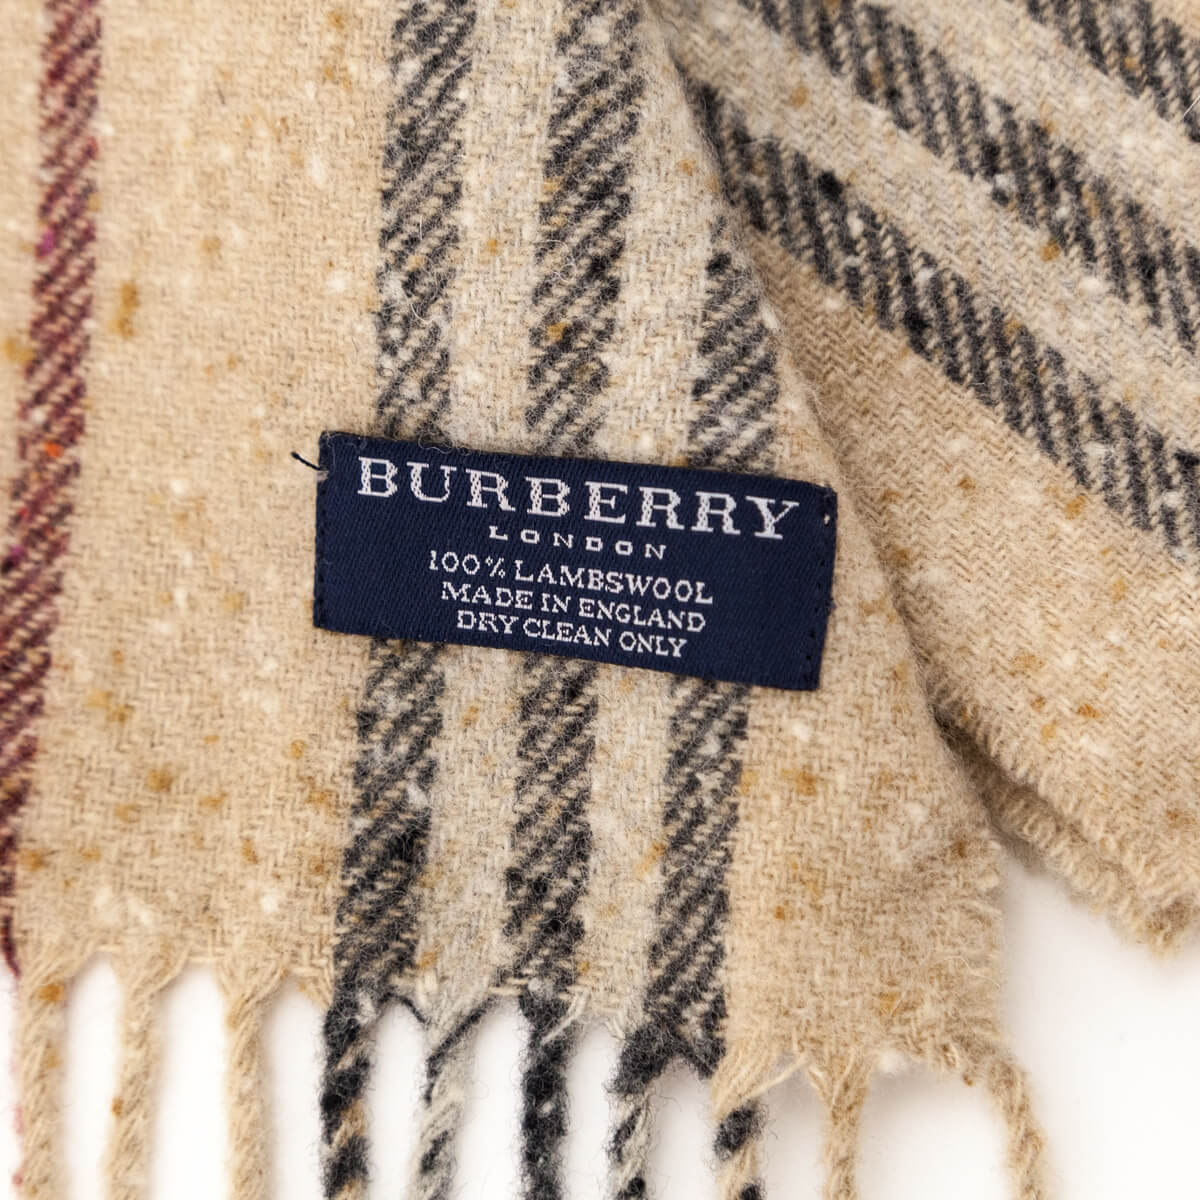 Burberry Tan Striped Lambswool Scarf - Love that Bag etc - Preowned Authentic Designer Handbags & Preloved Fashions